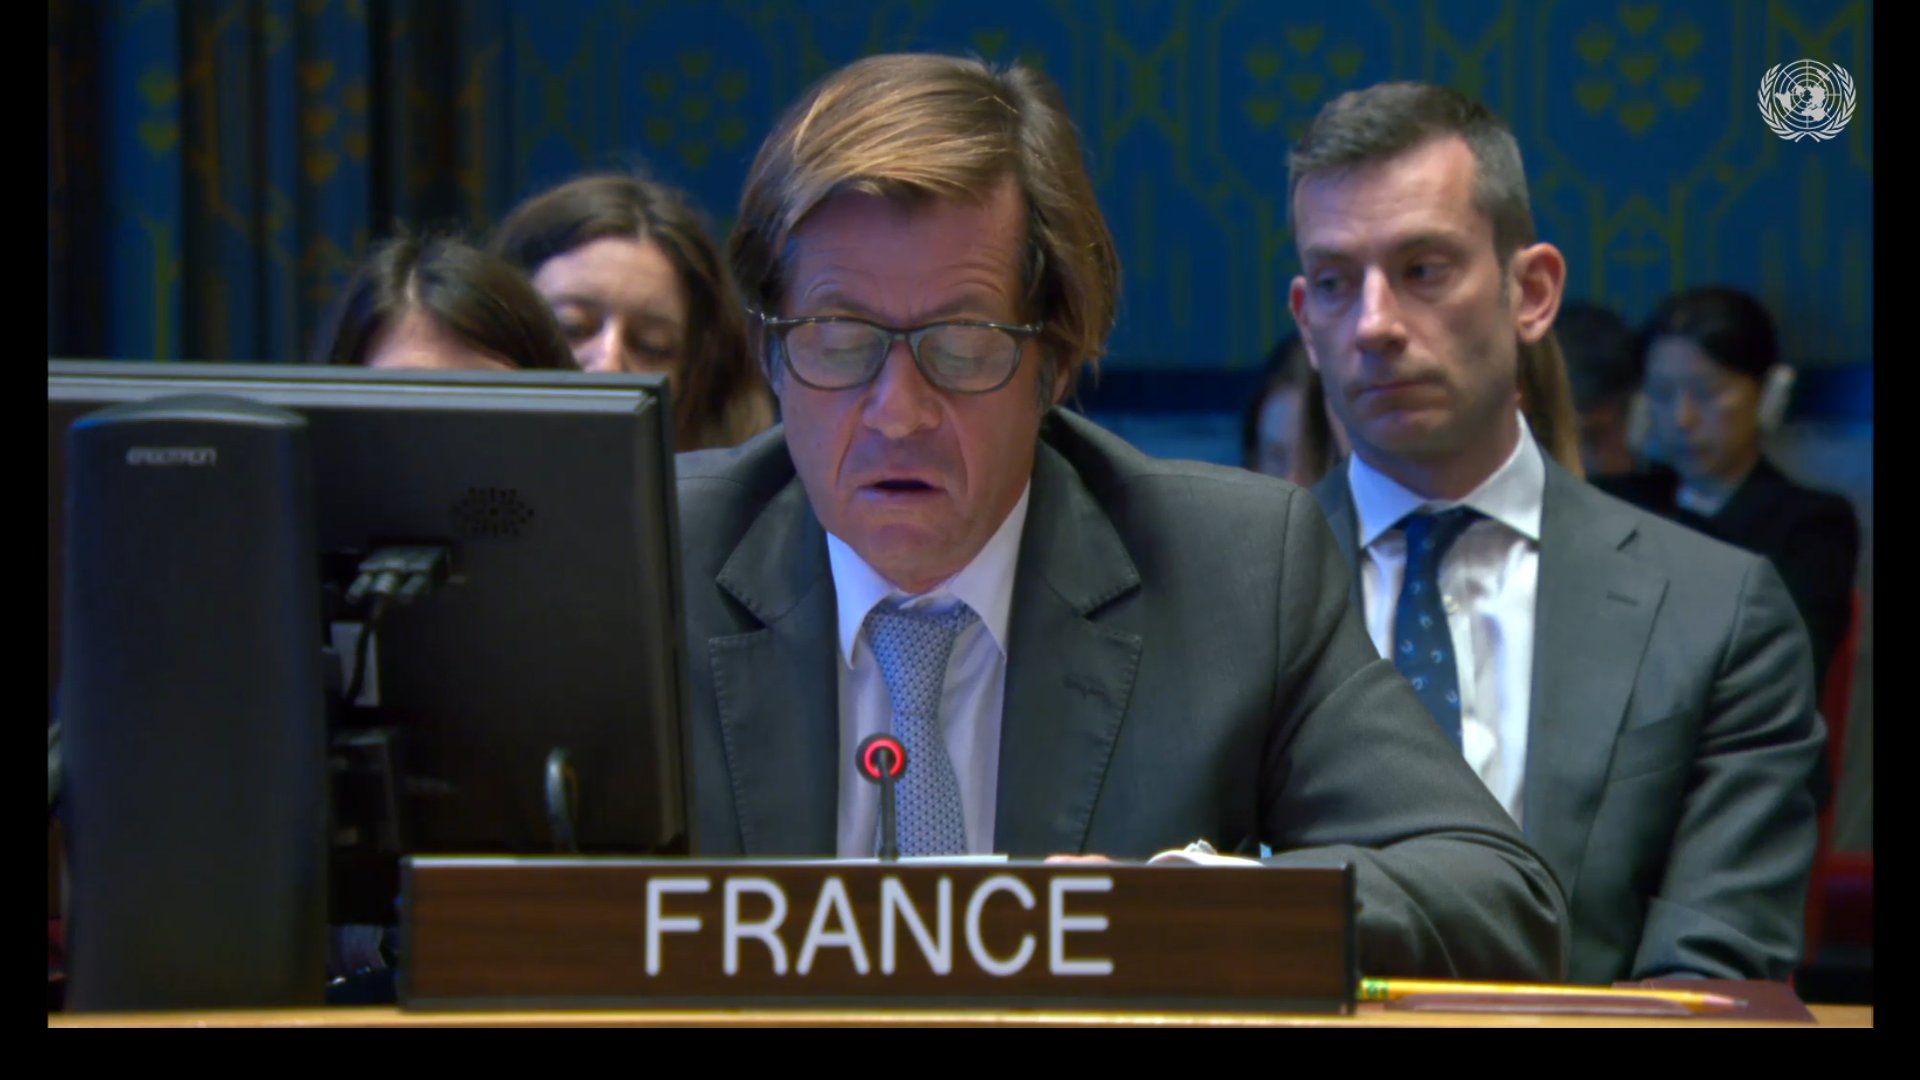 France urges all parties to Sahara conflict to return to round table process, reiterates support for autonomy plan